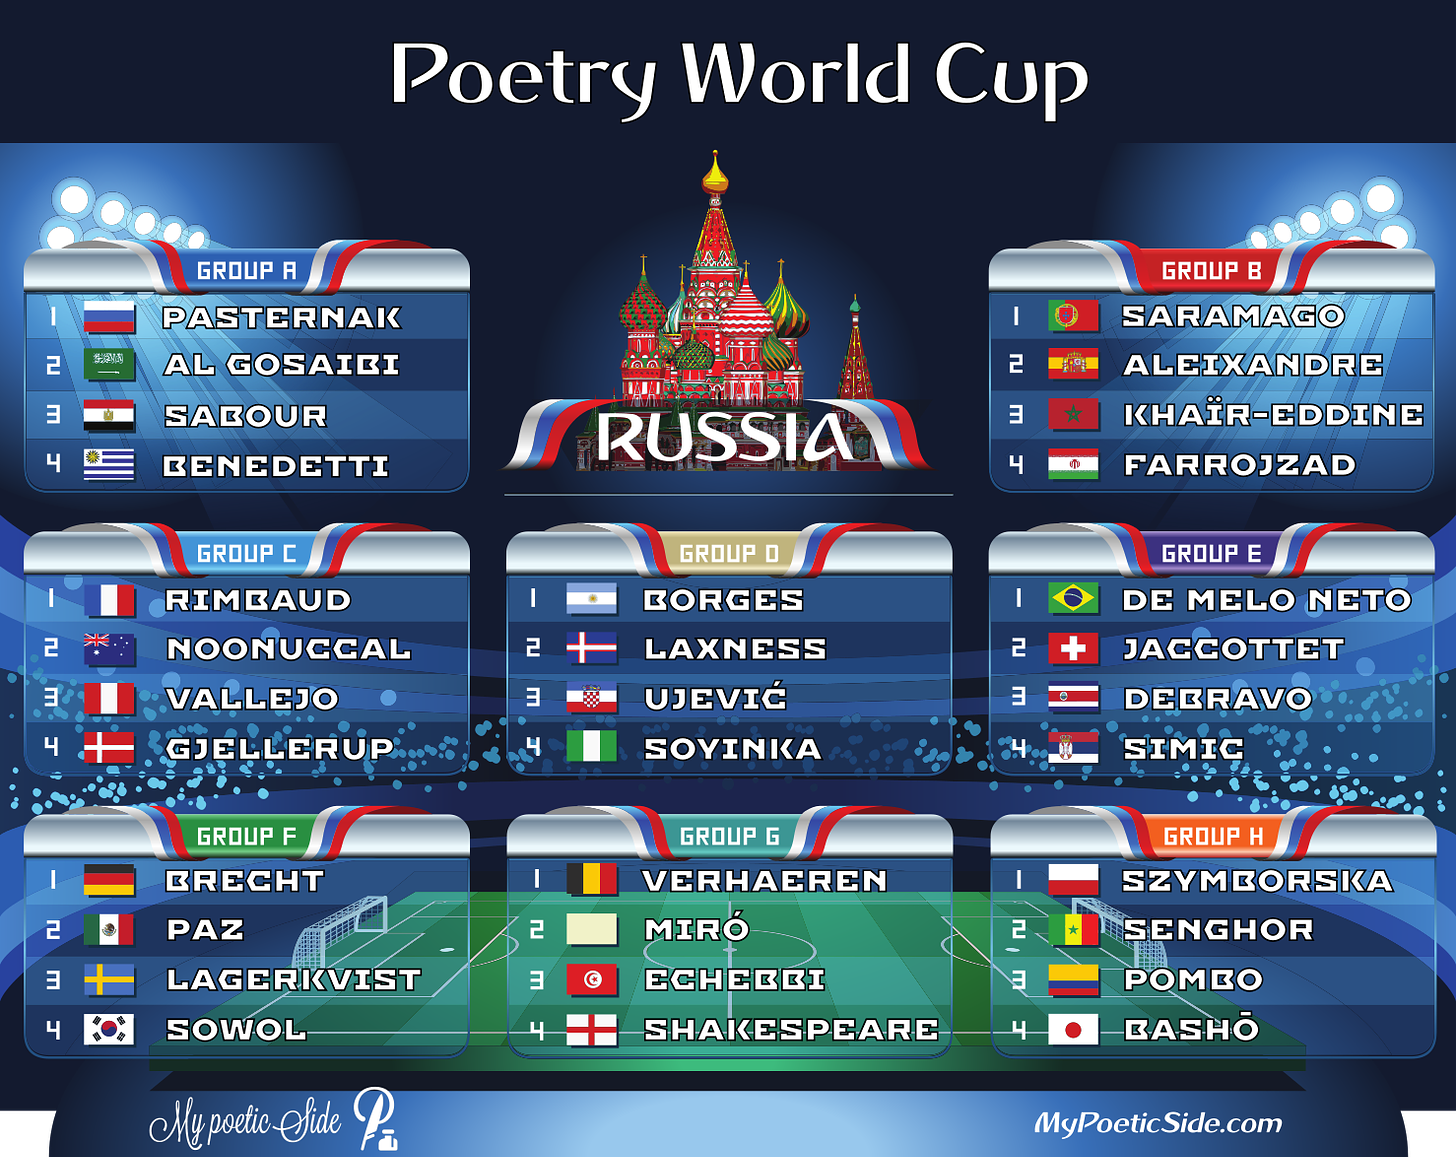 The Poetry World Cup